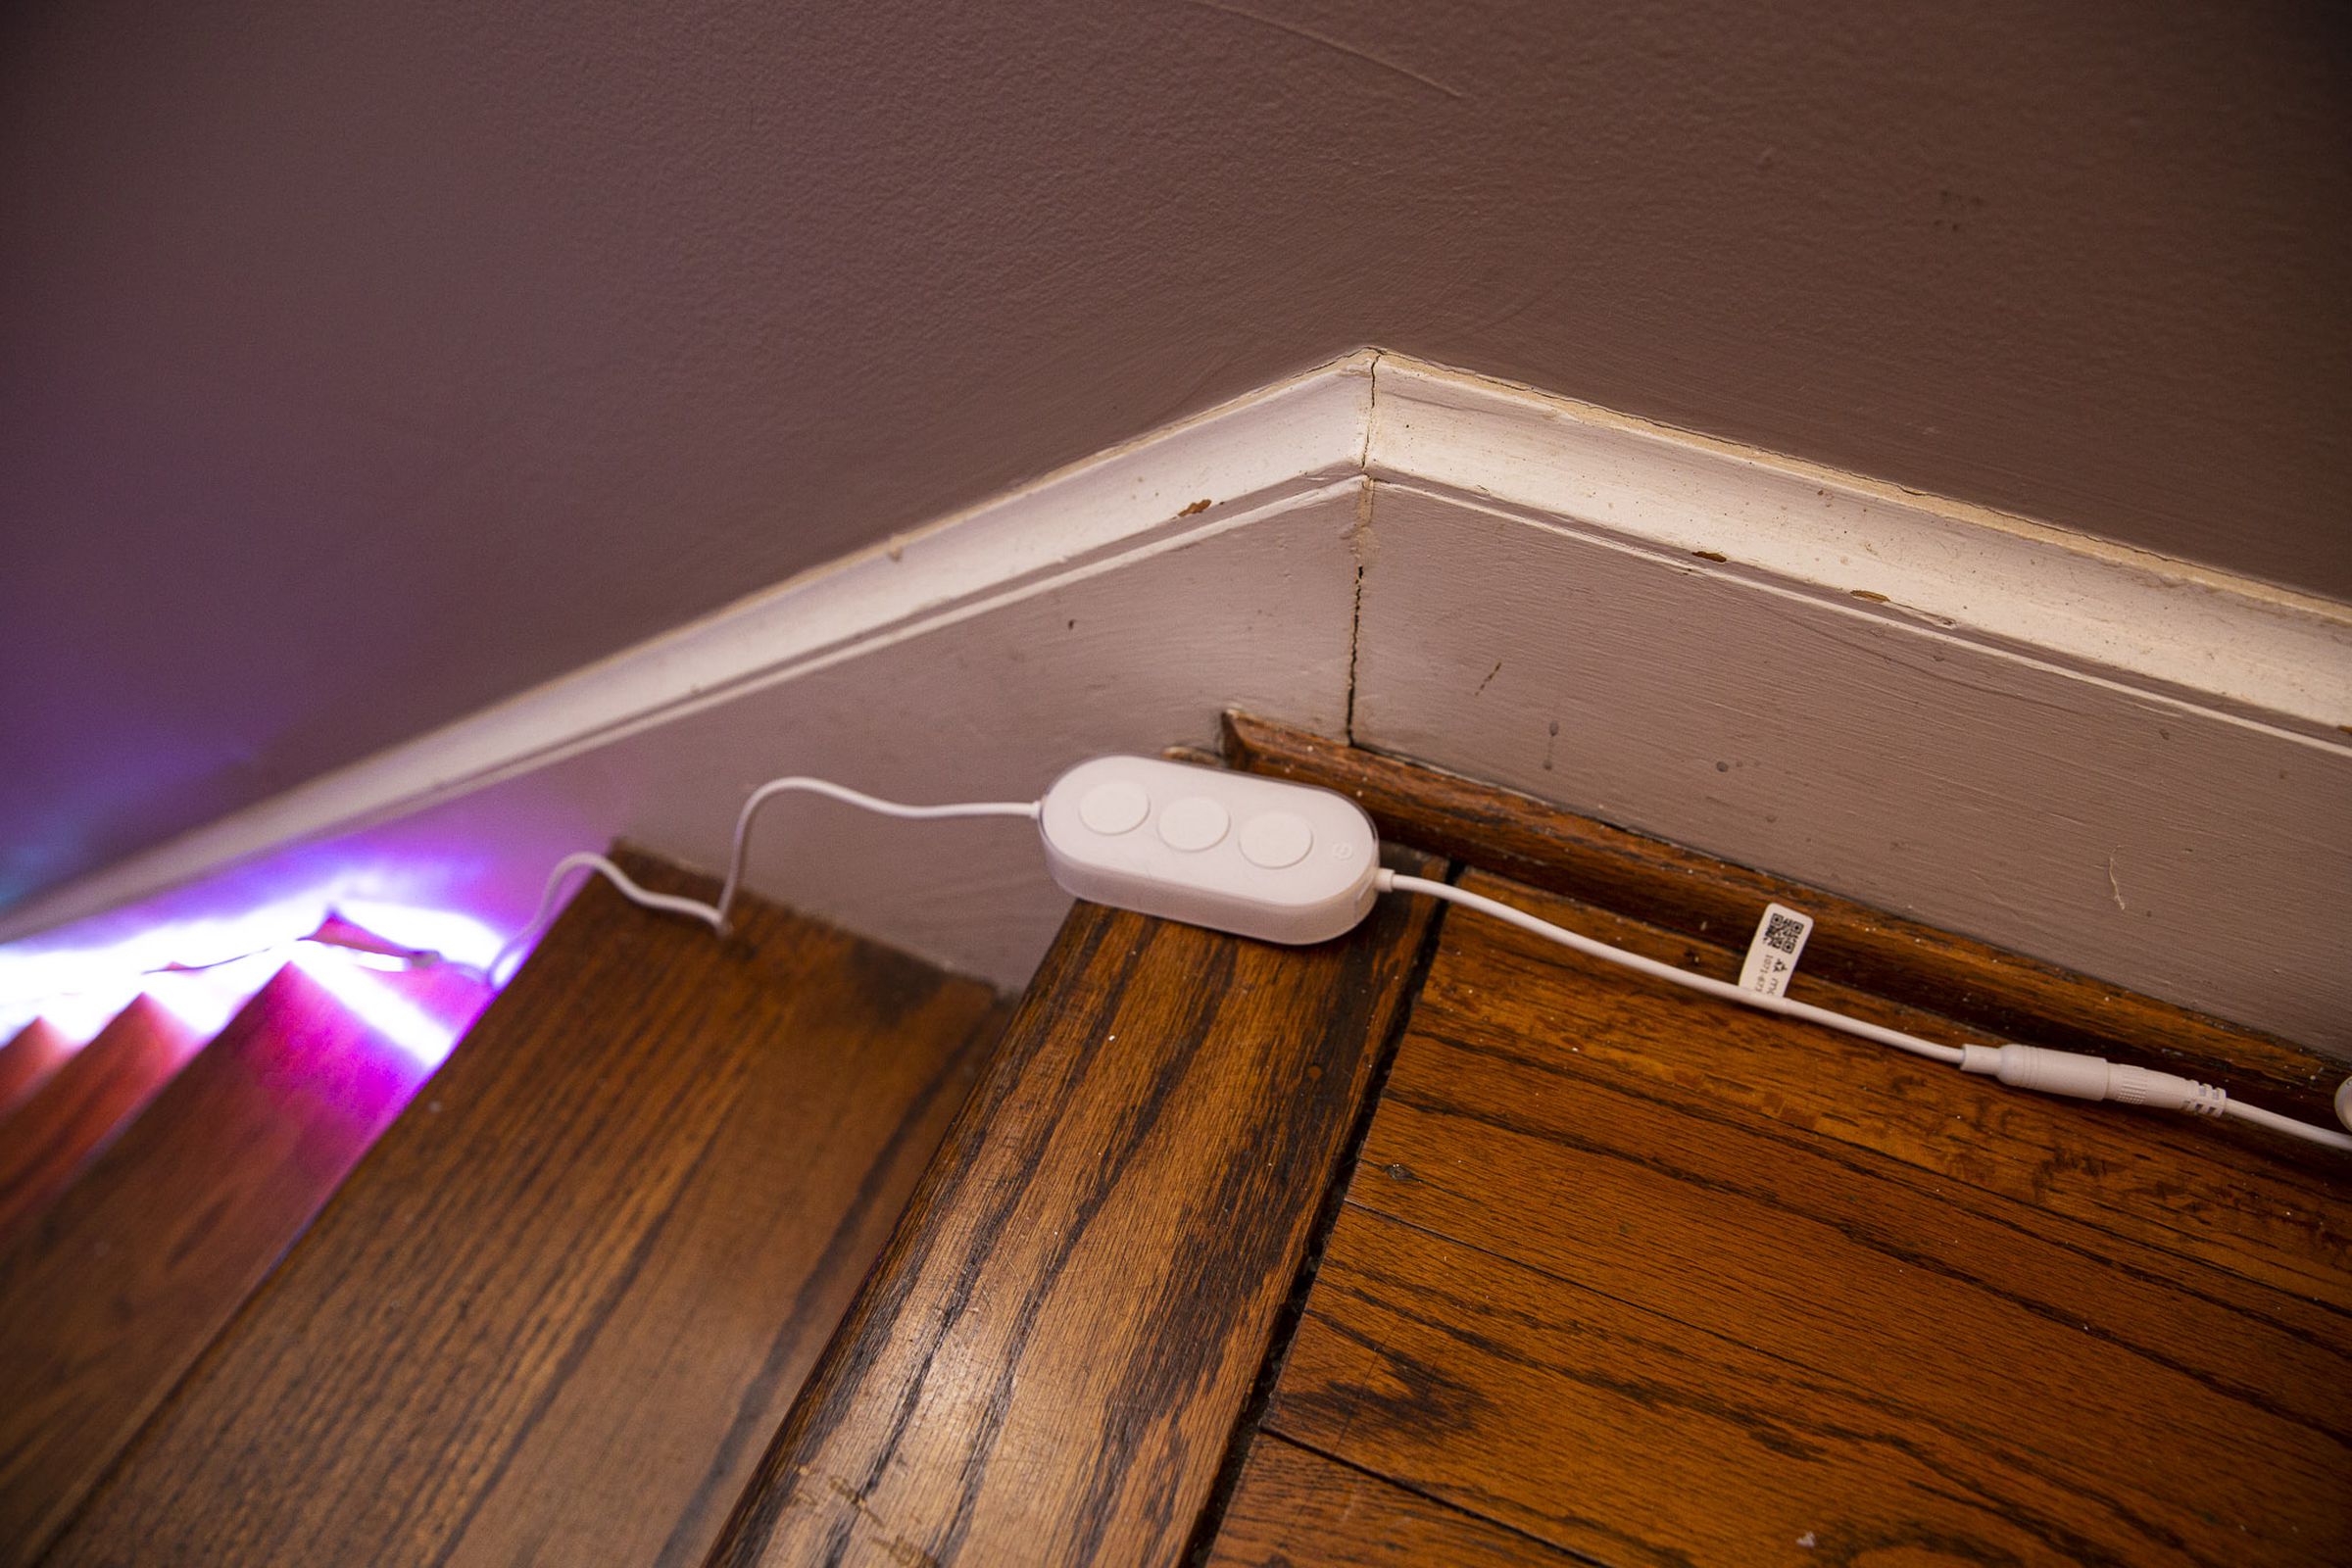 The Govee M1 light strip has a physical controller to turn the light on and off, change color, and brighten / dim.